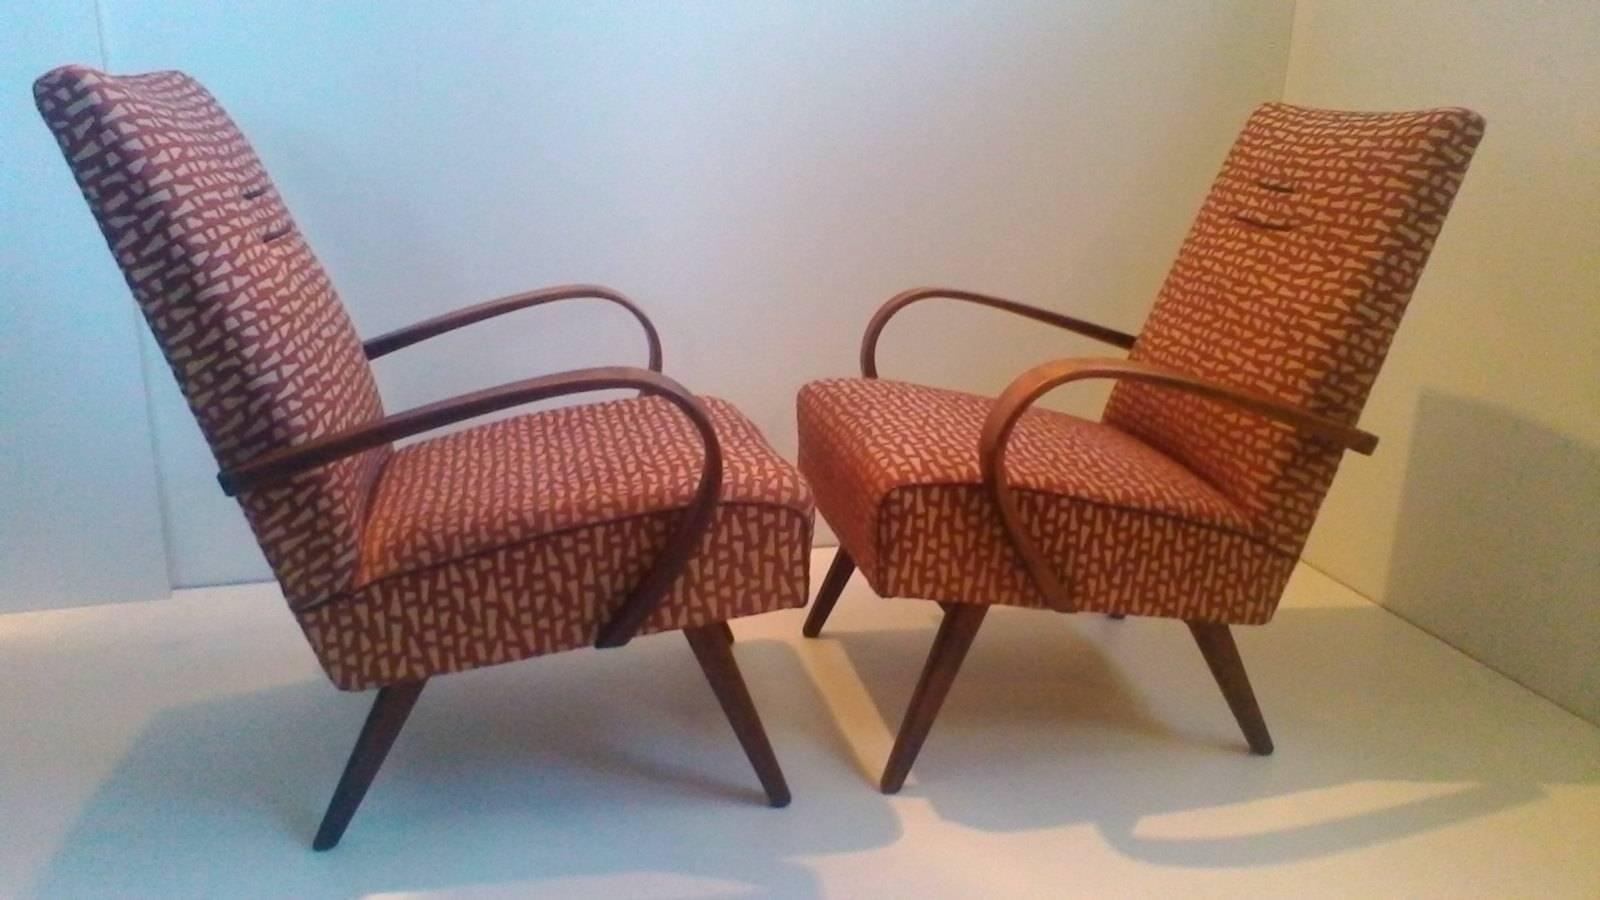 This chair was made in Czech Republic during 1960s by Thon company (before Thonet). Legs and bentwood armrests are made from beechwood .Both items are in very good original condition.